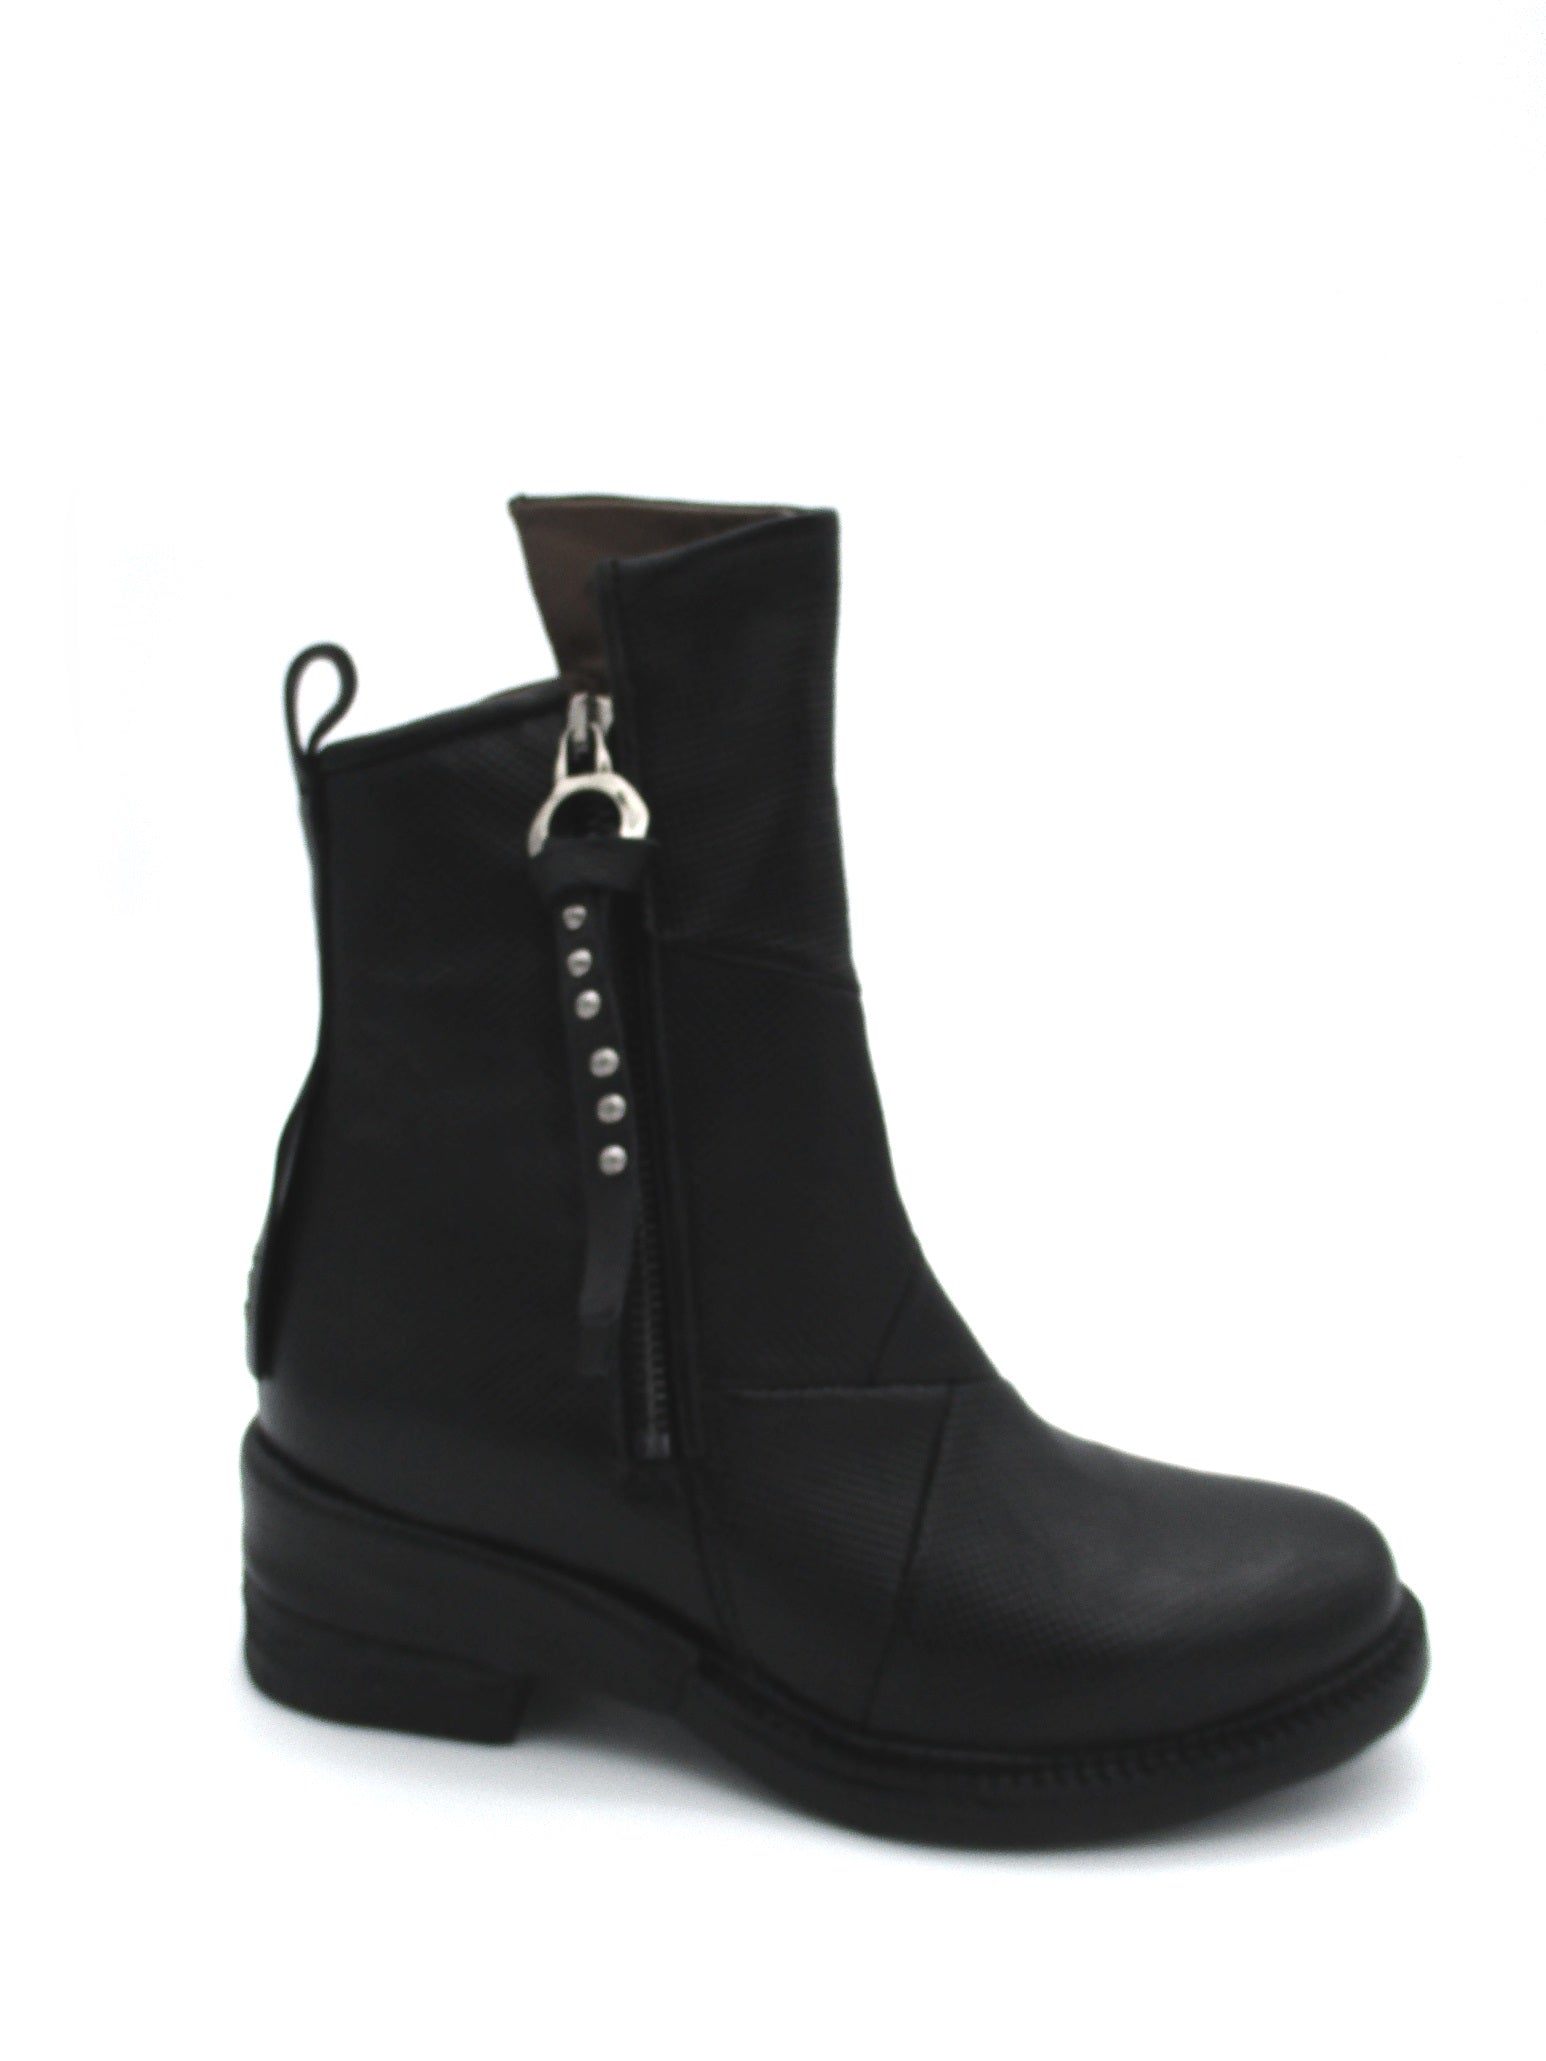 Women's leather ankle boot AS98 A23210 Black